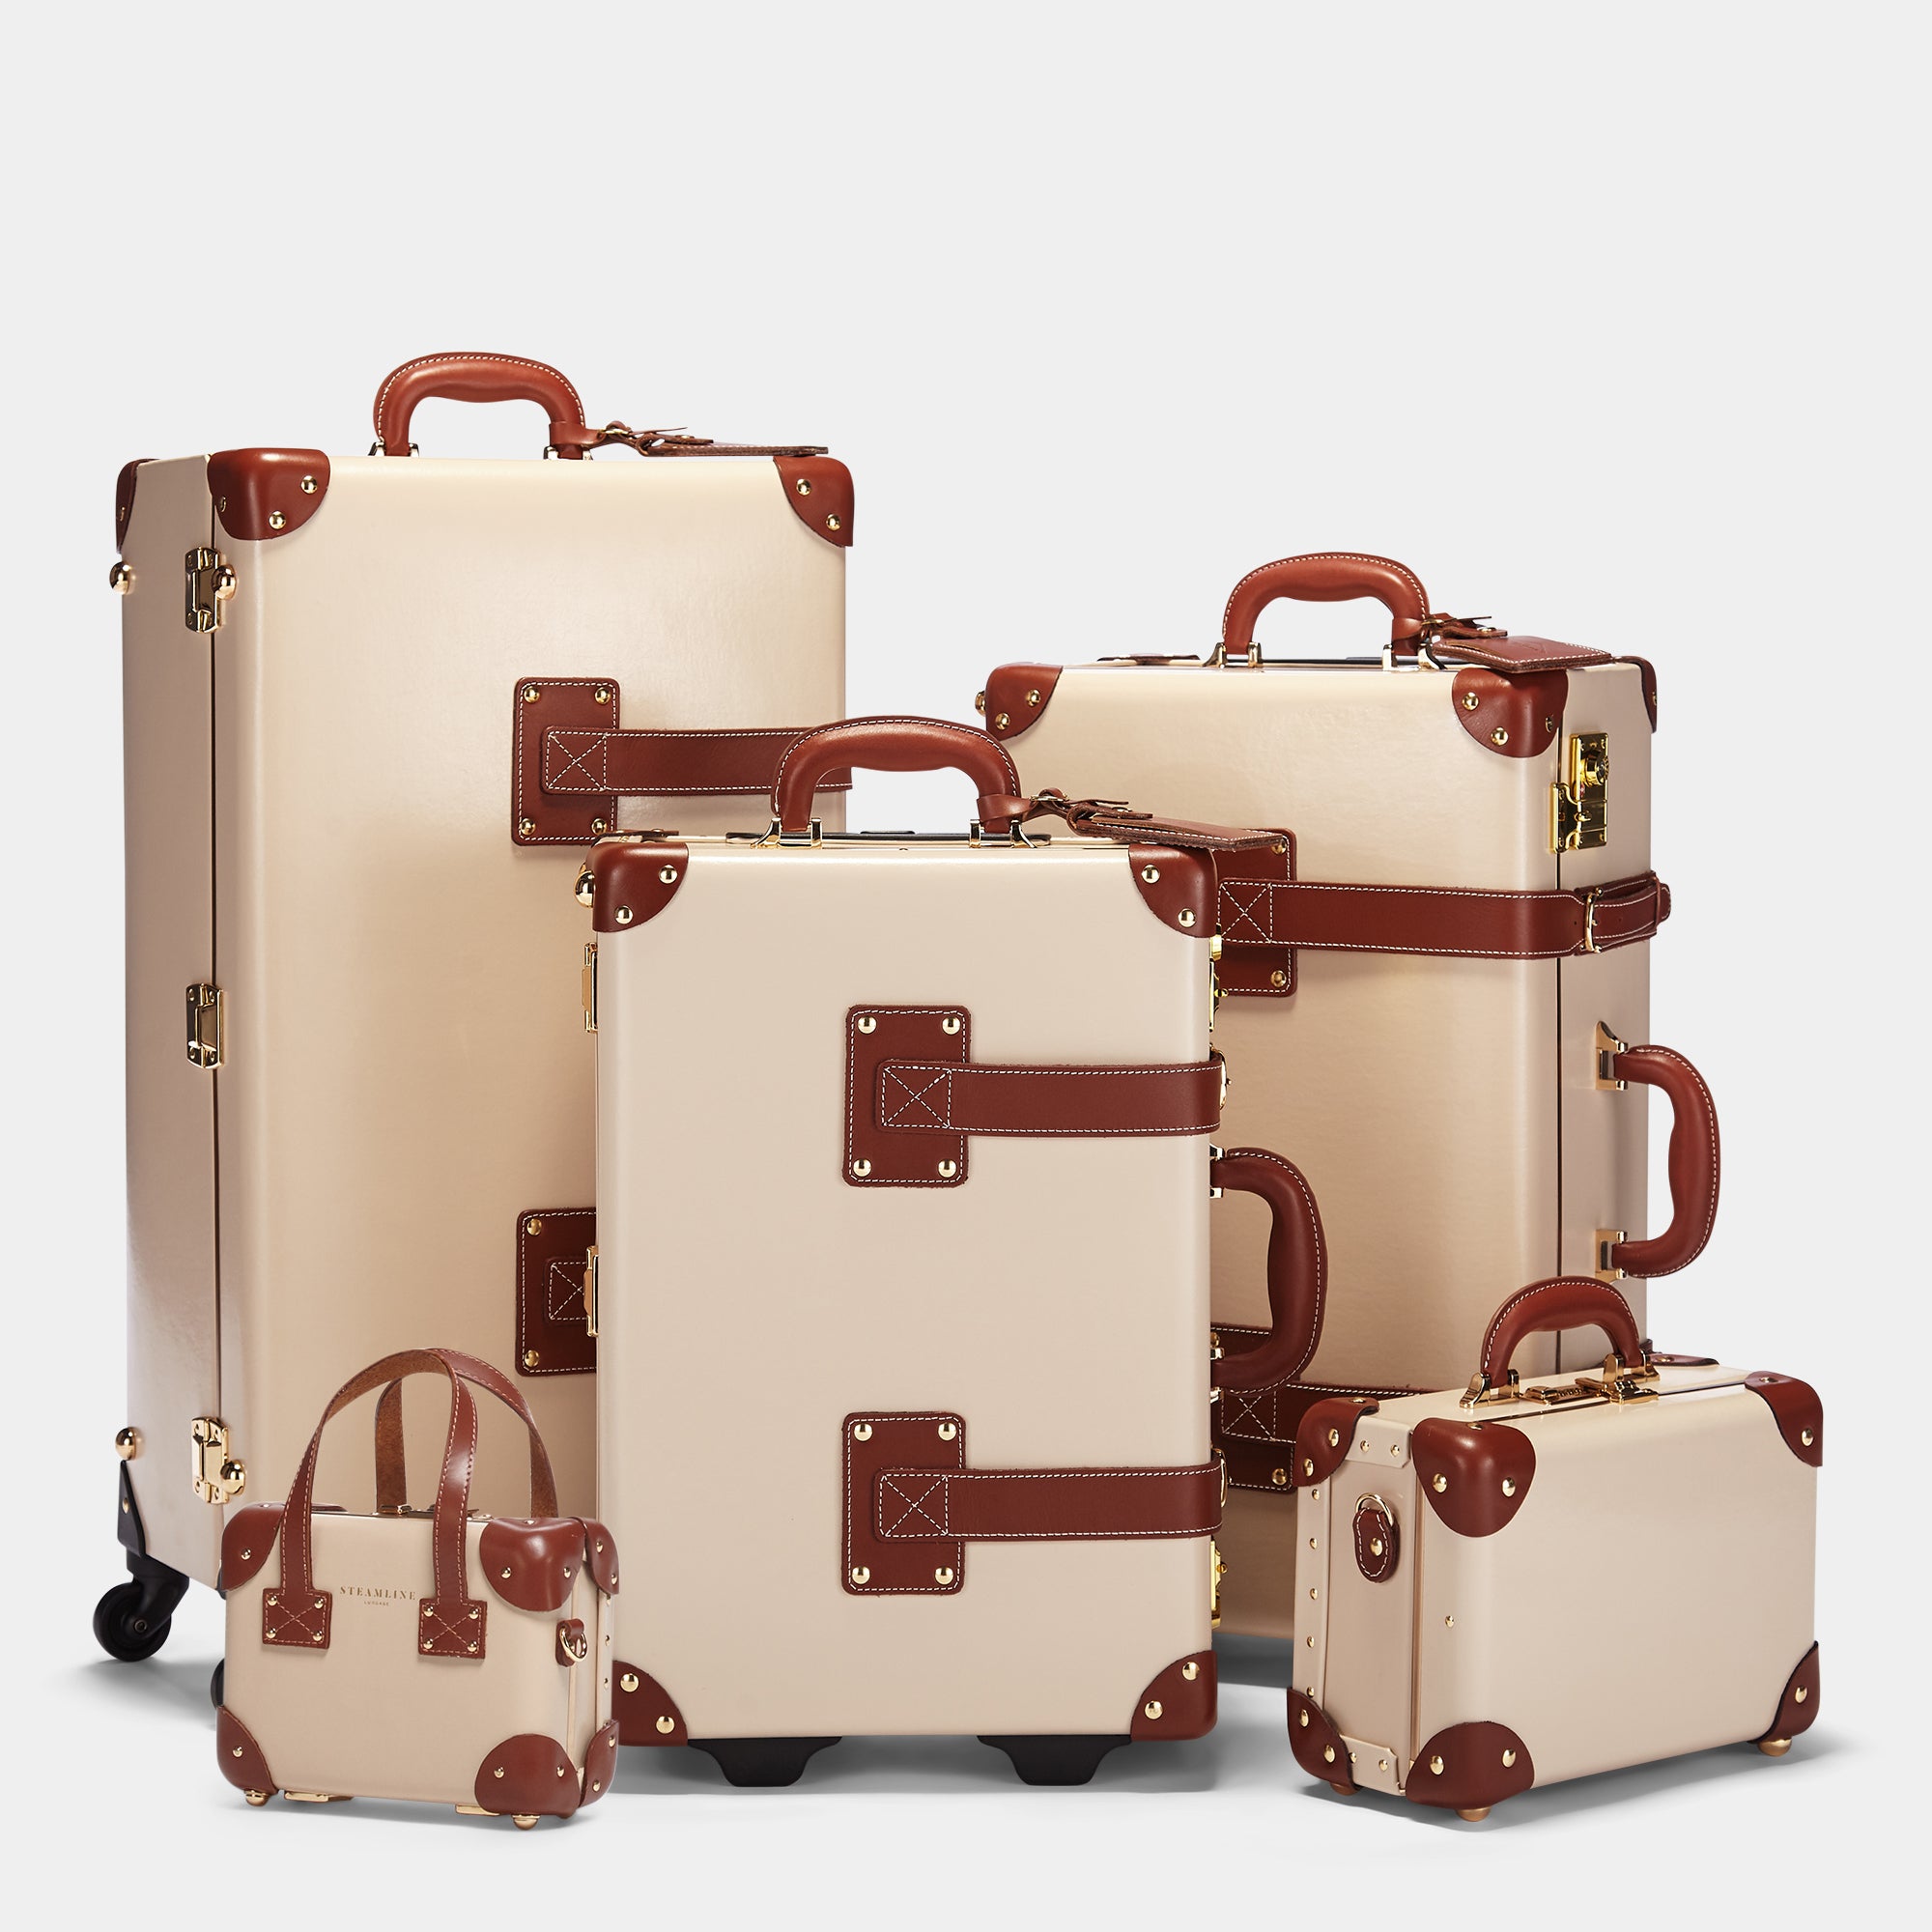 The complete Cream Diplomat Collection: Spinner, Carryon, Stowaway, Vanity and Mini.